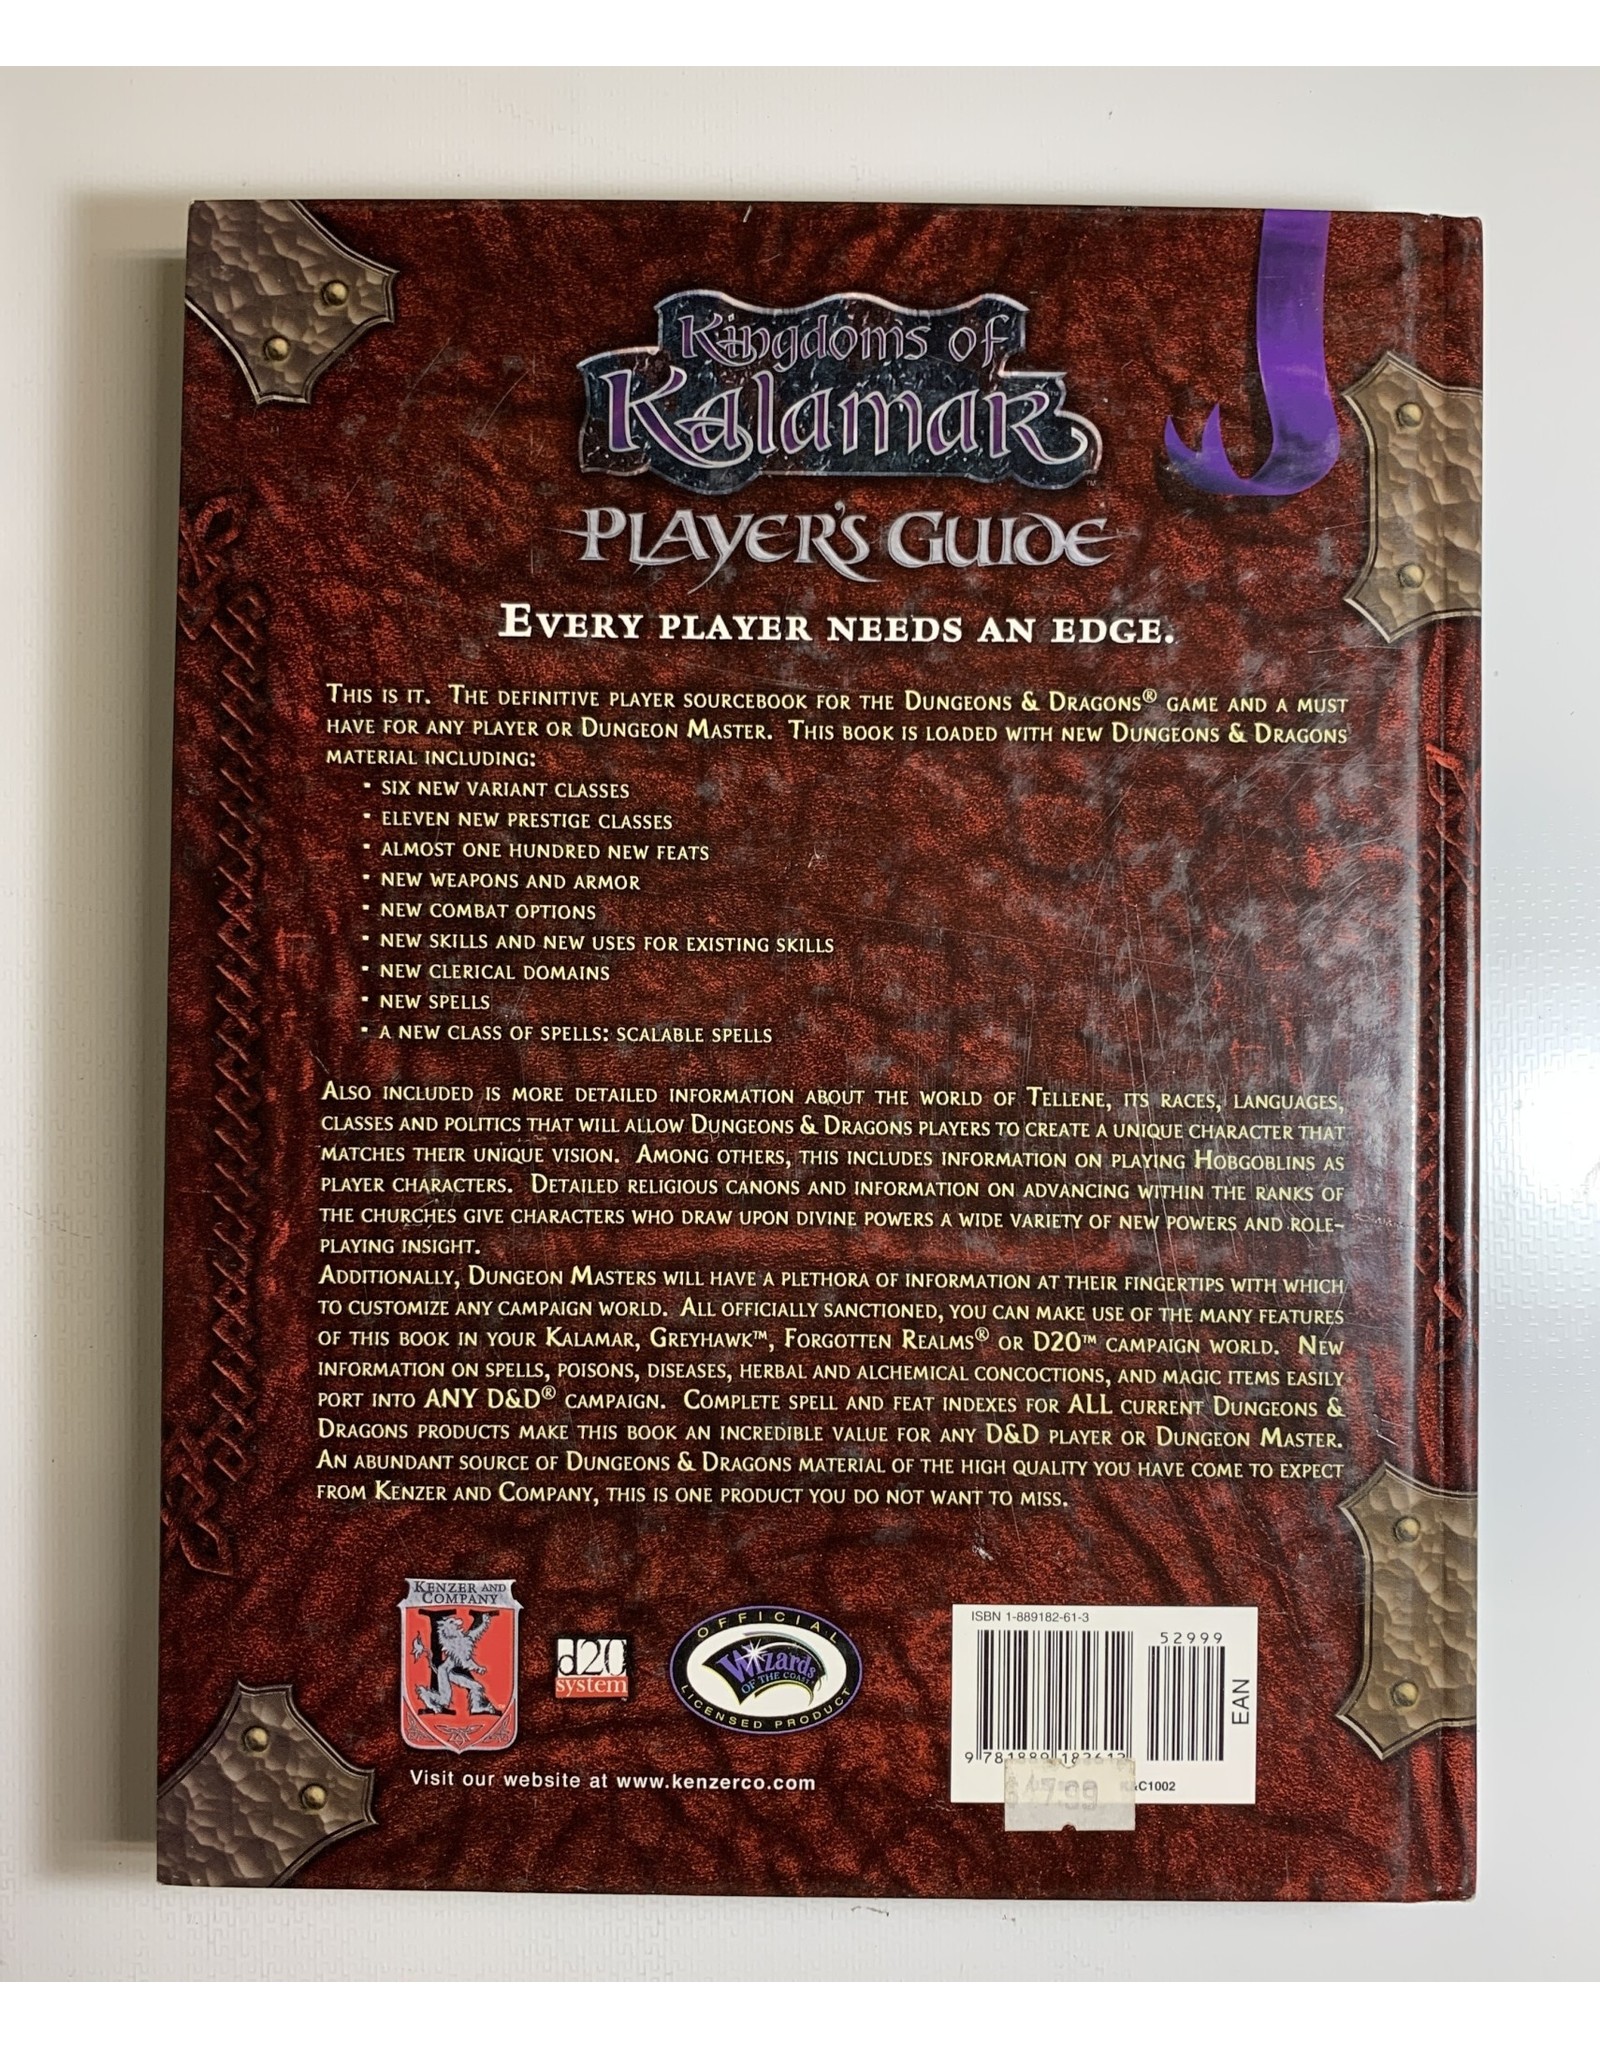 Wizards of the Coast Dungeons & Dragons (3rd Edition) - Kingdoms of Kalamar Player's Guide (2002)